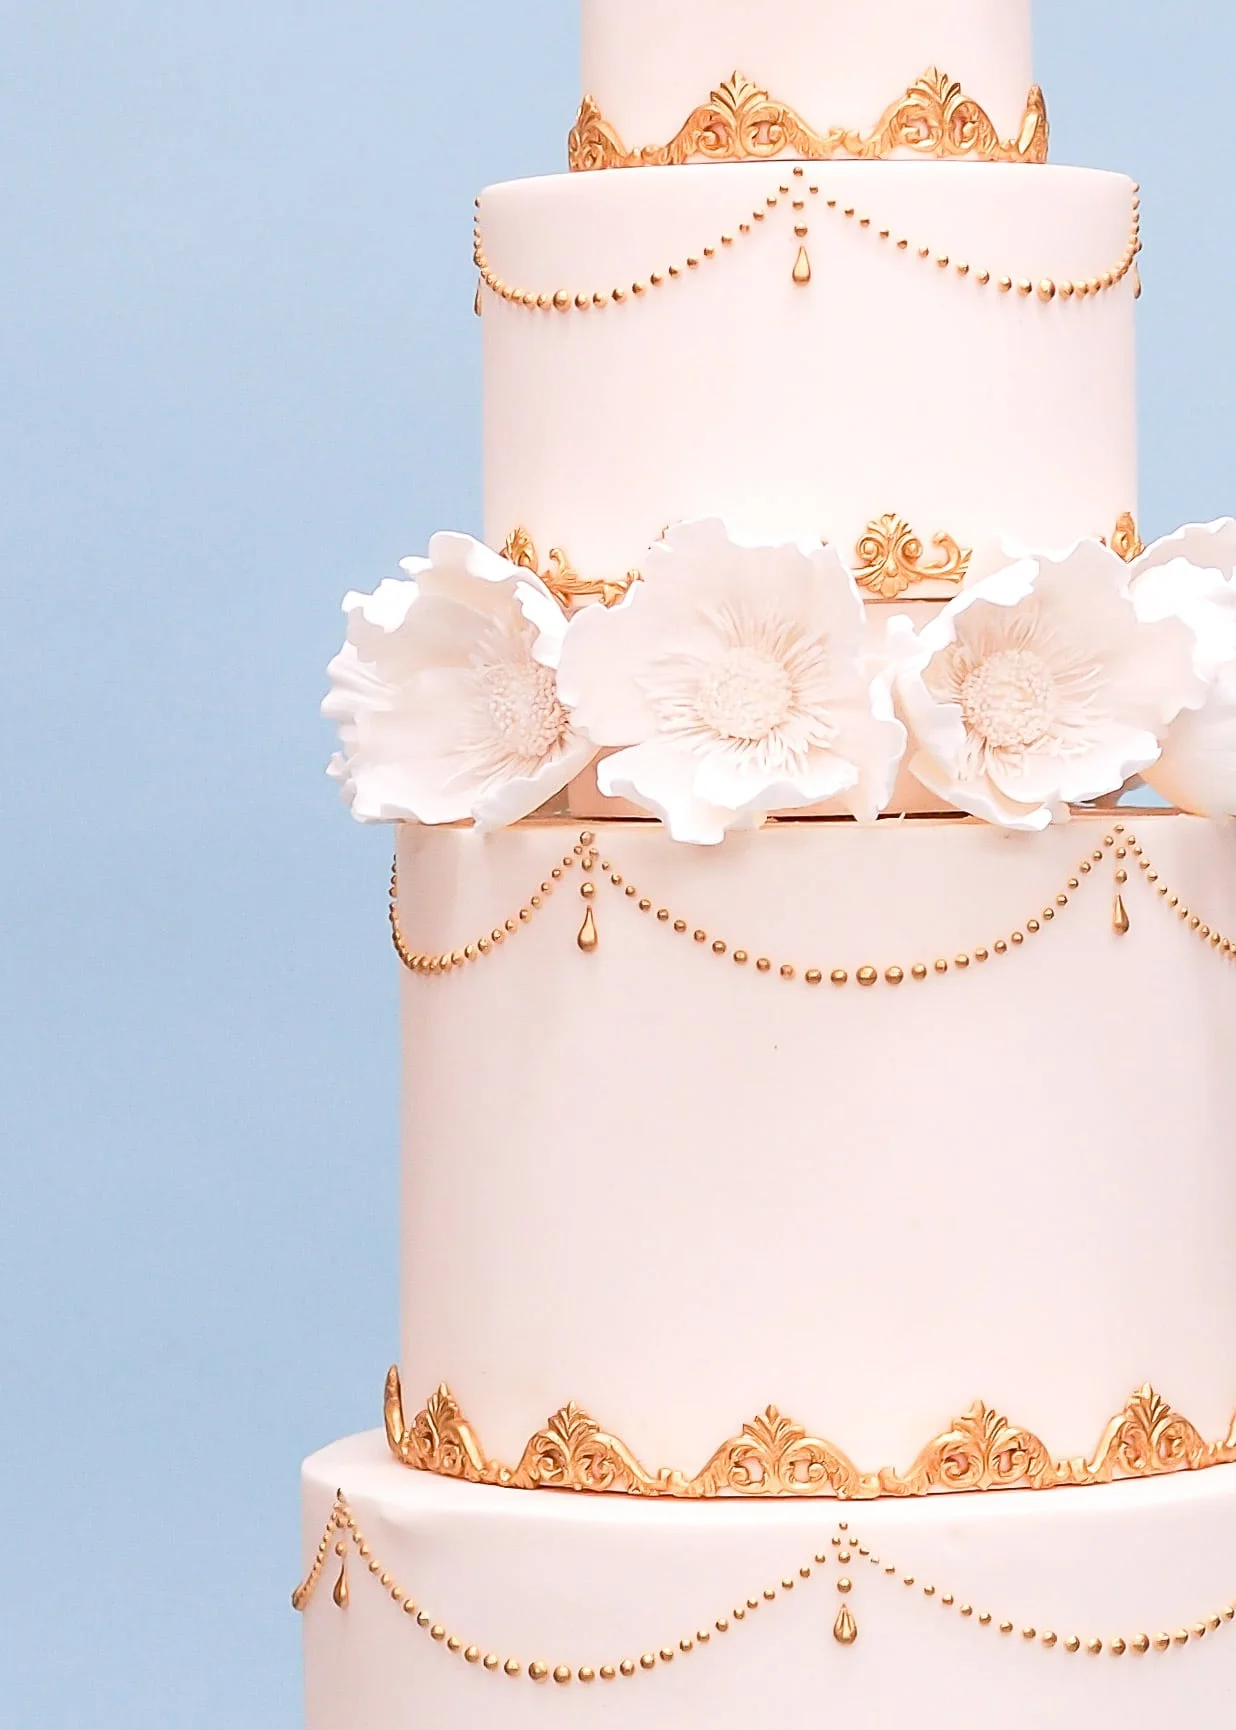 Gold and Ivory Piped Anemones wedding cake